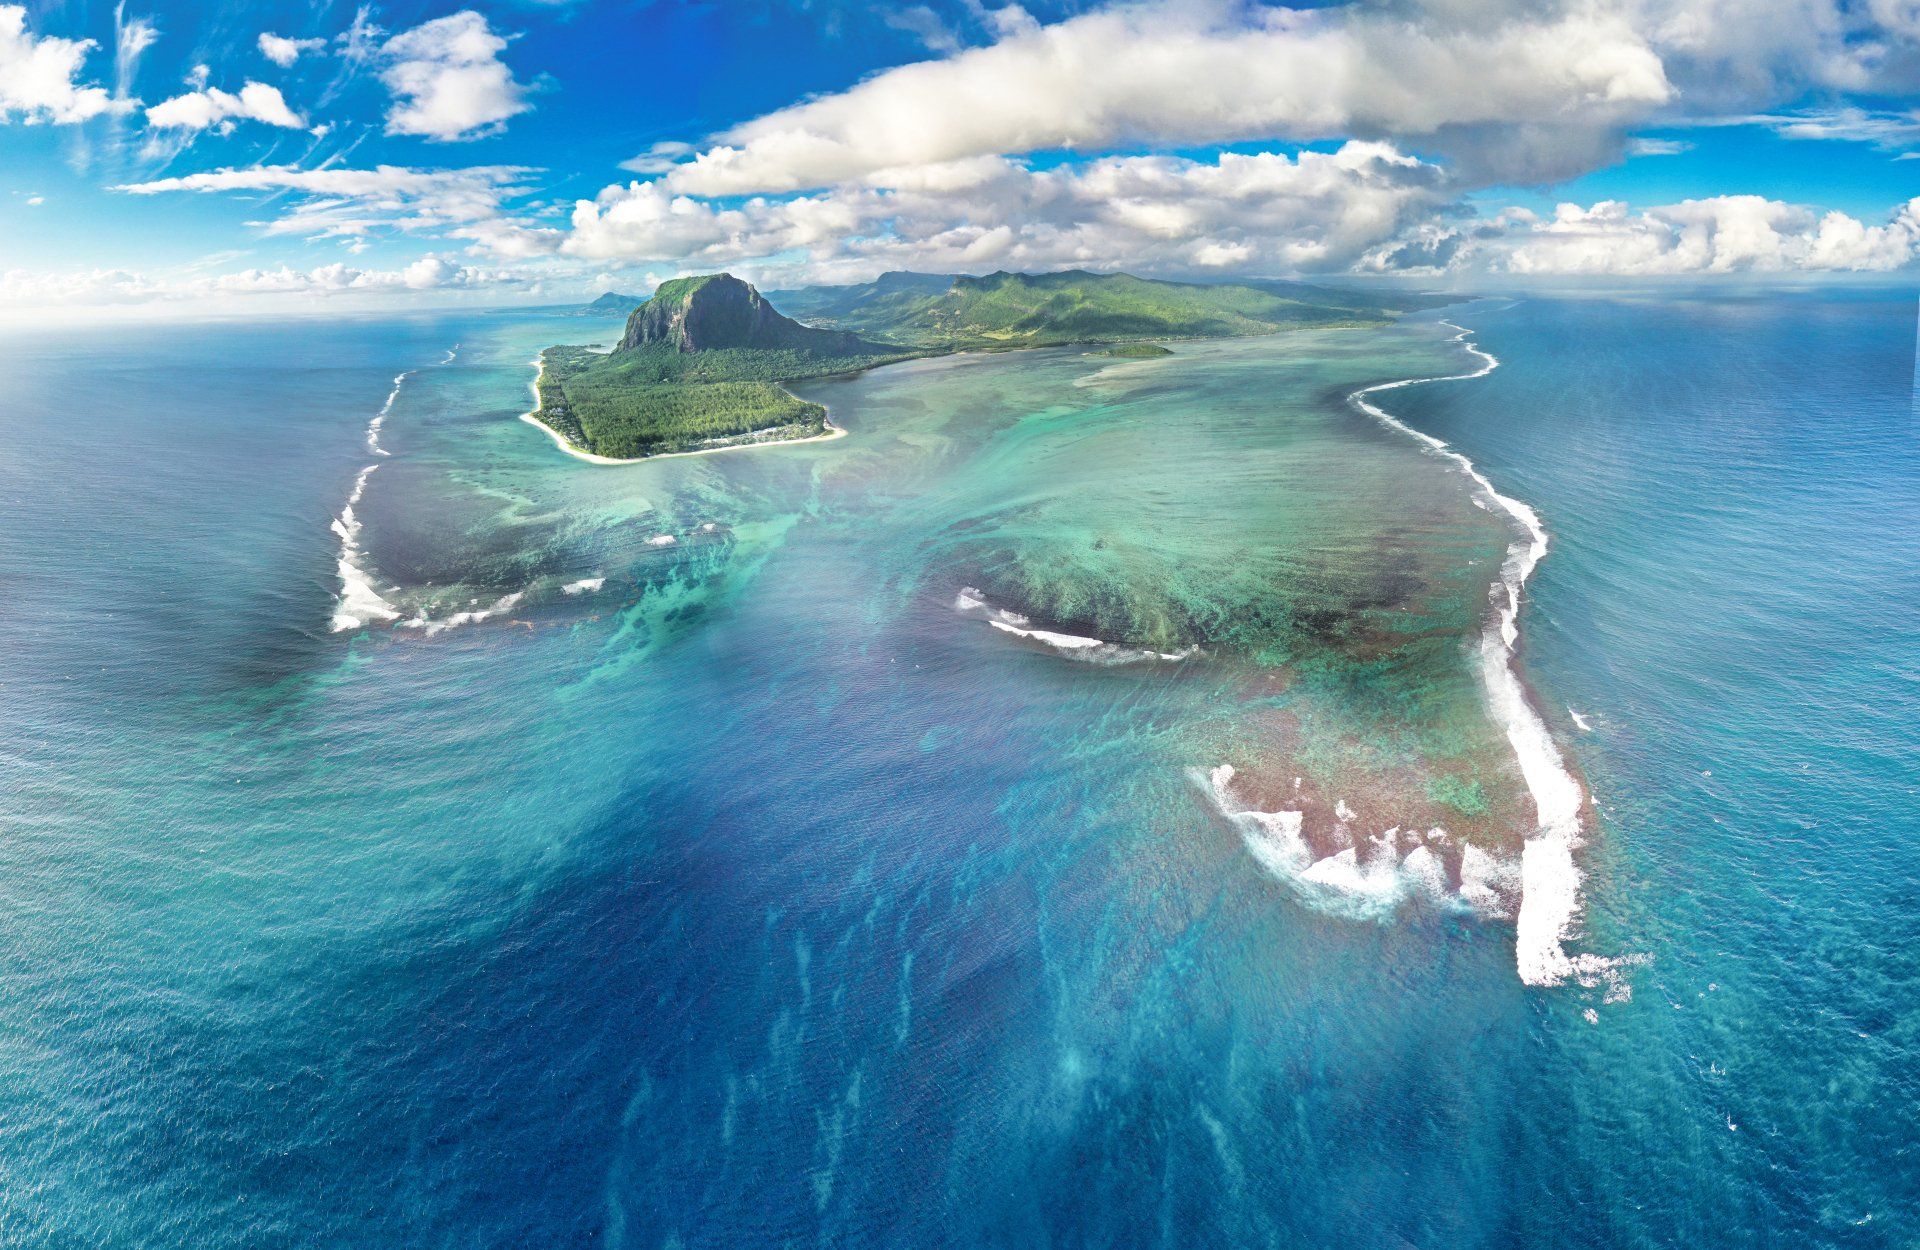 An aerial view of a small island in the middle of the ocean.